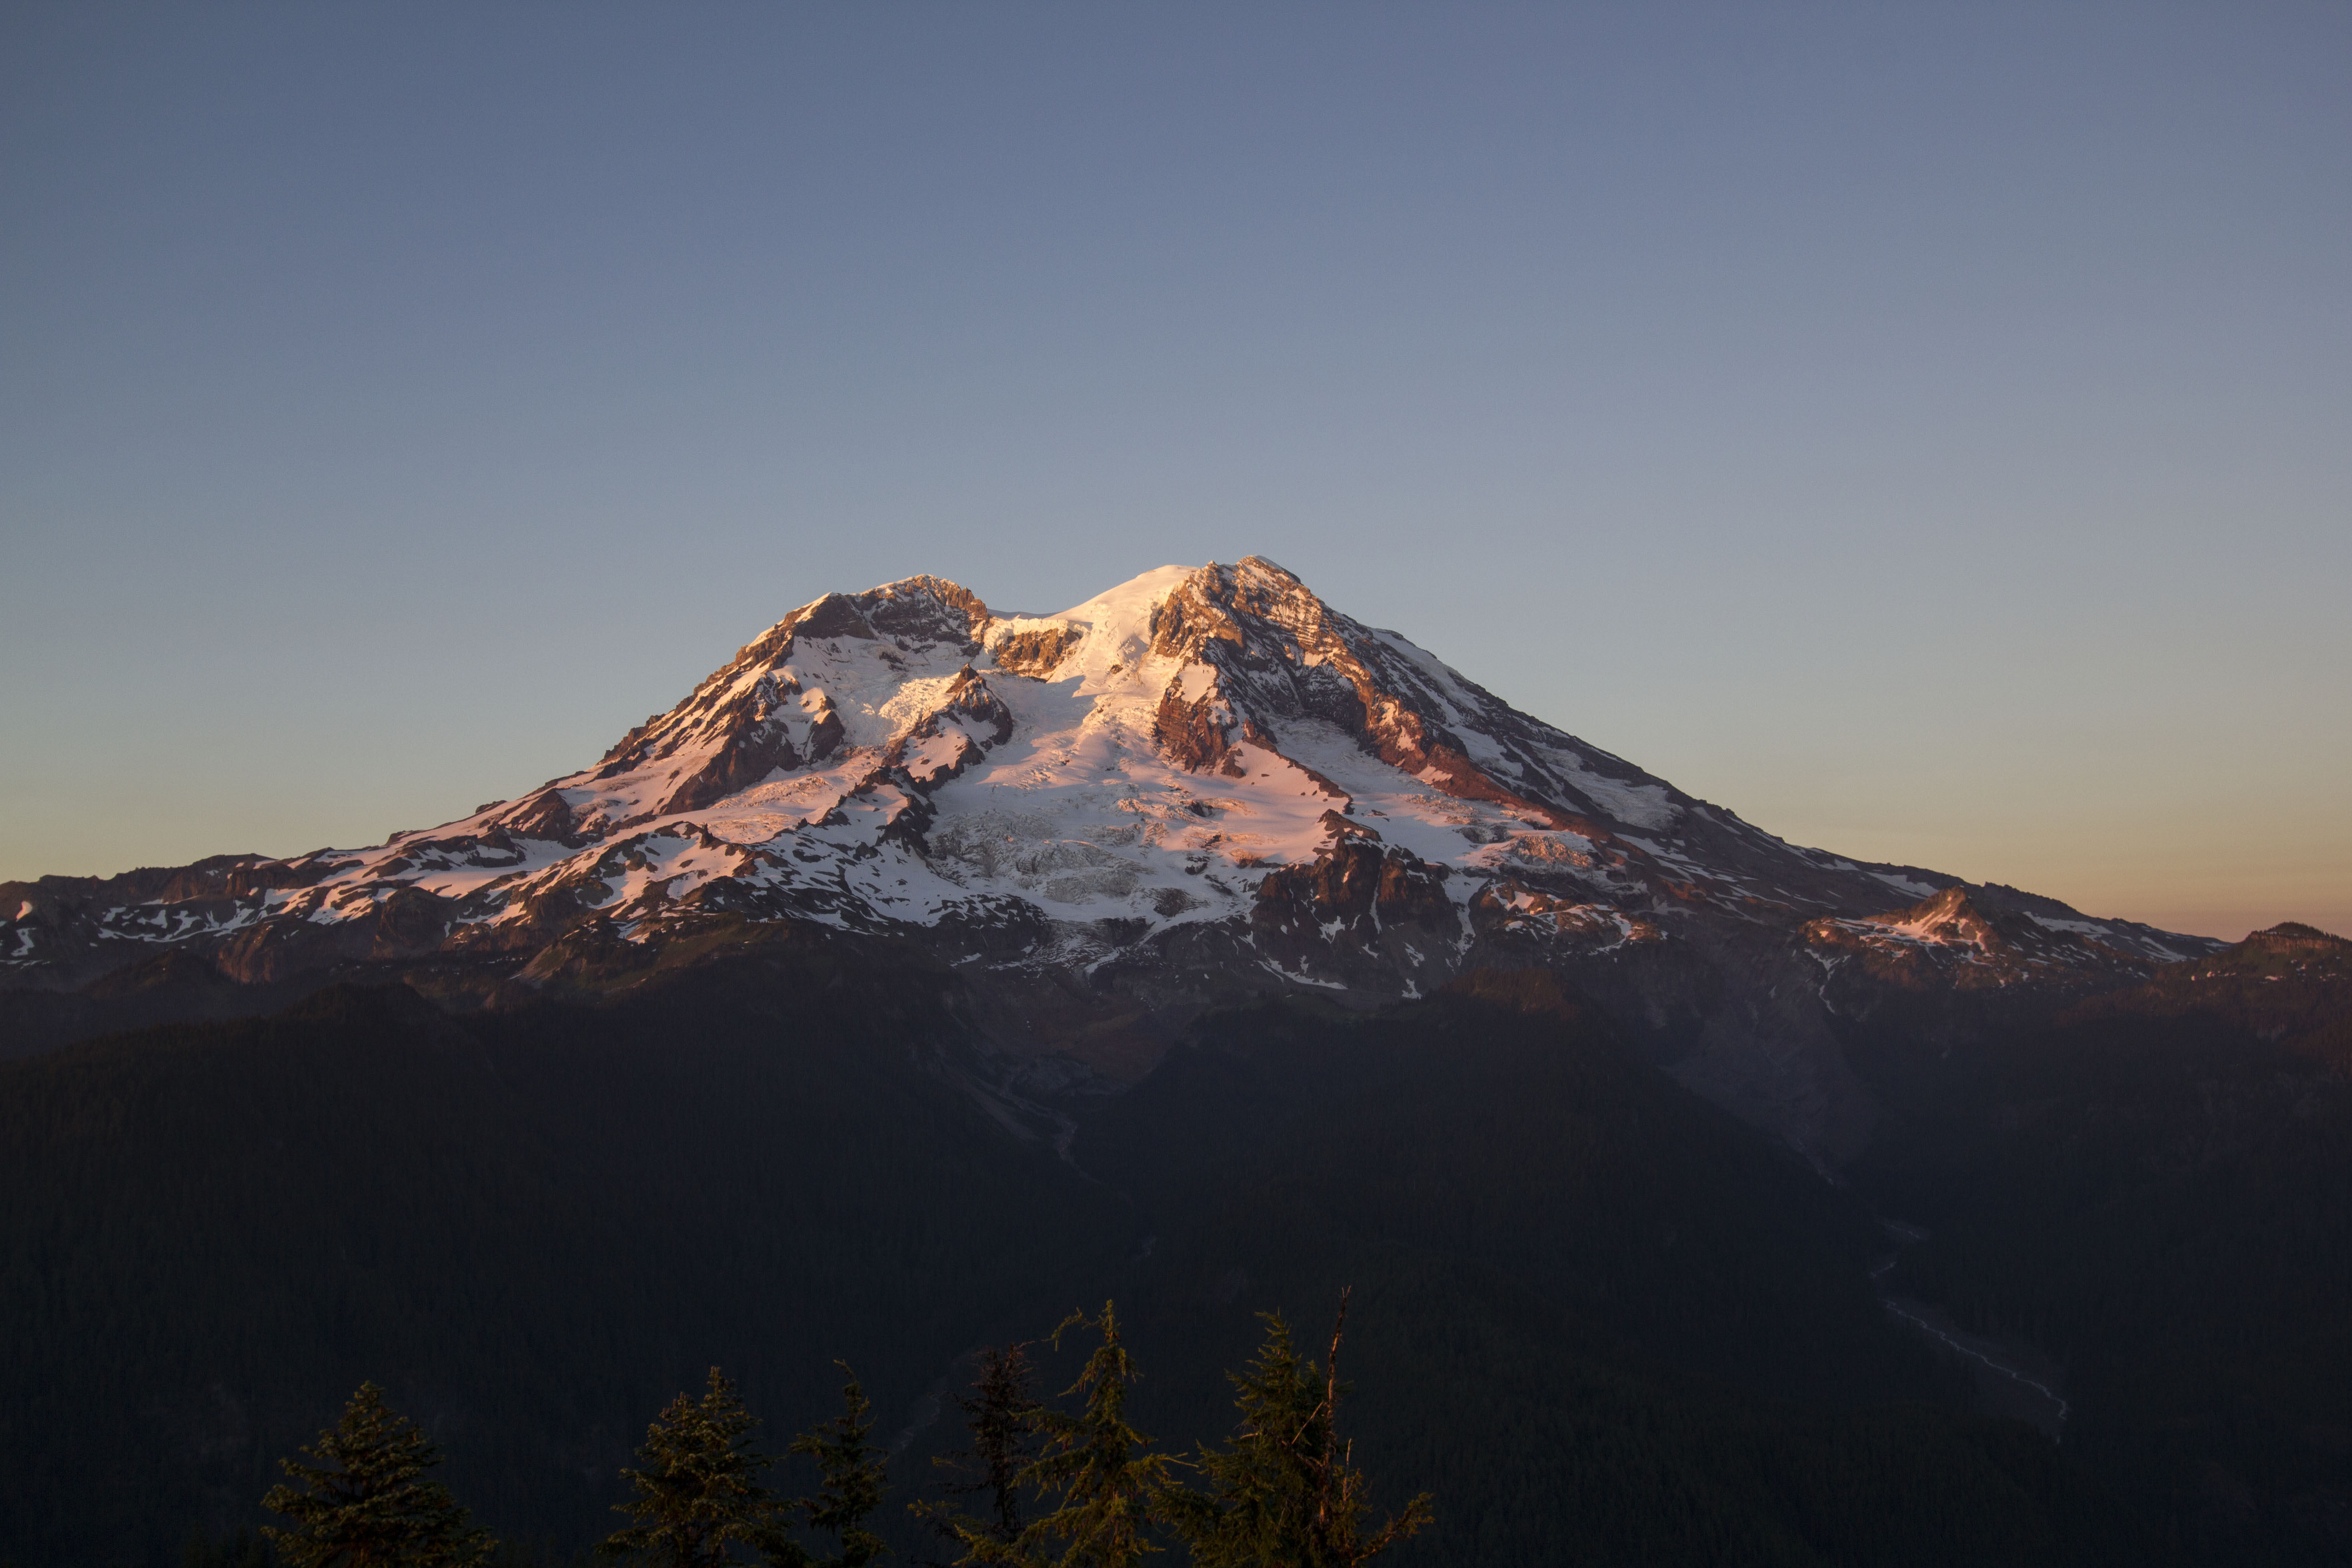 Sunset paints the glaciers of Mount Rainier in pink and gold.